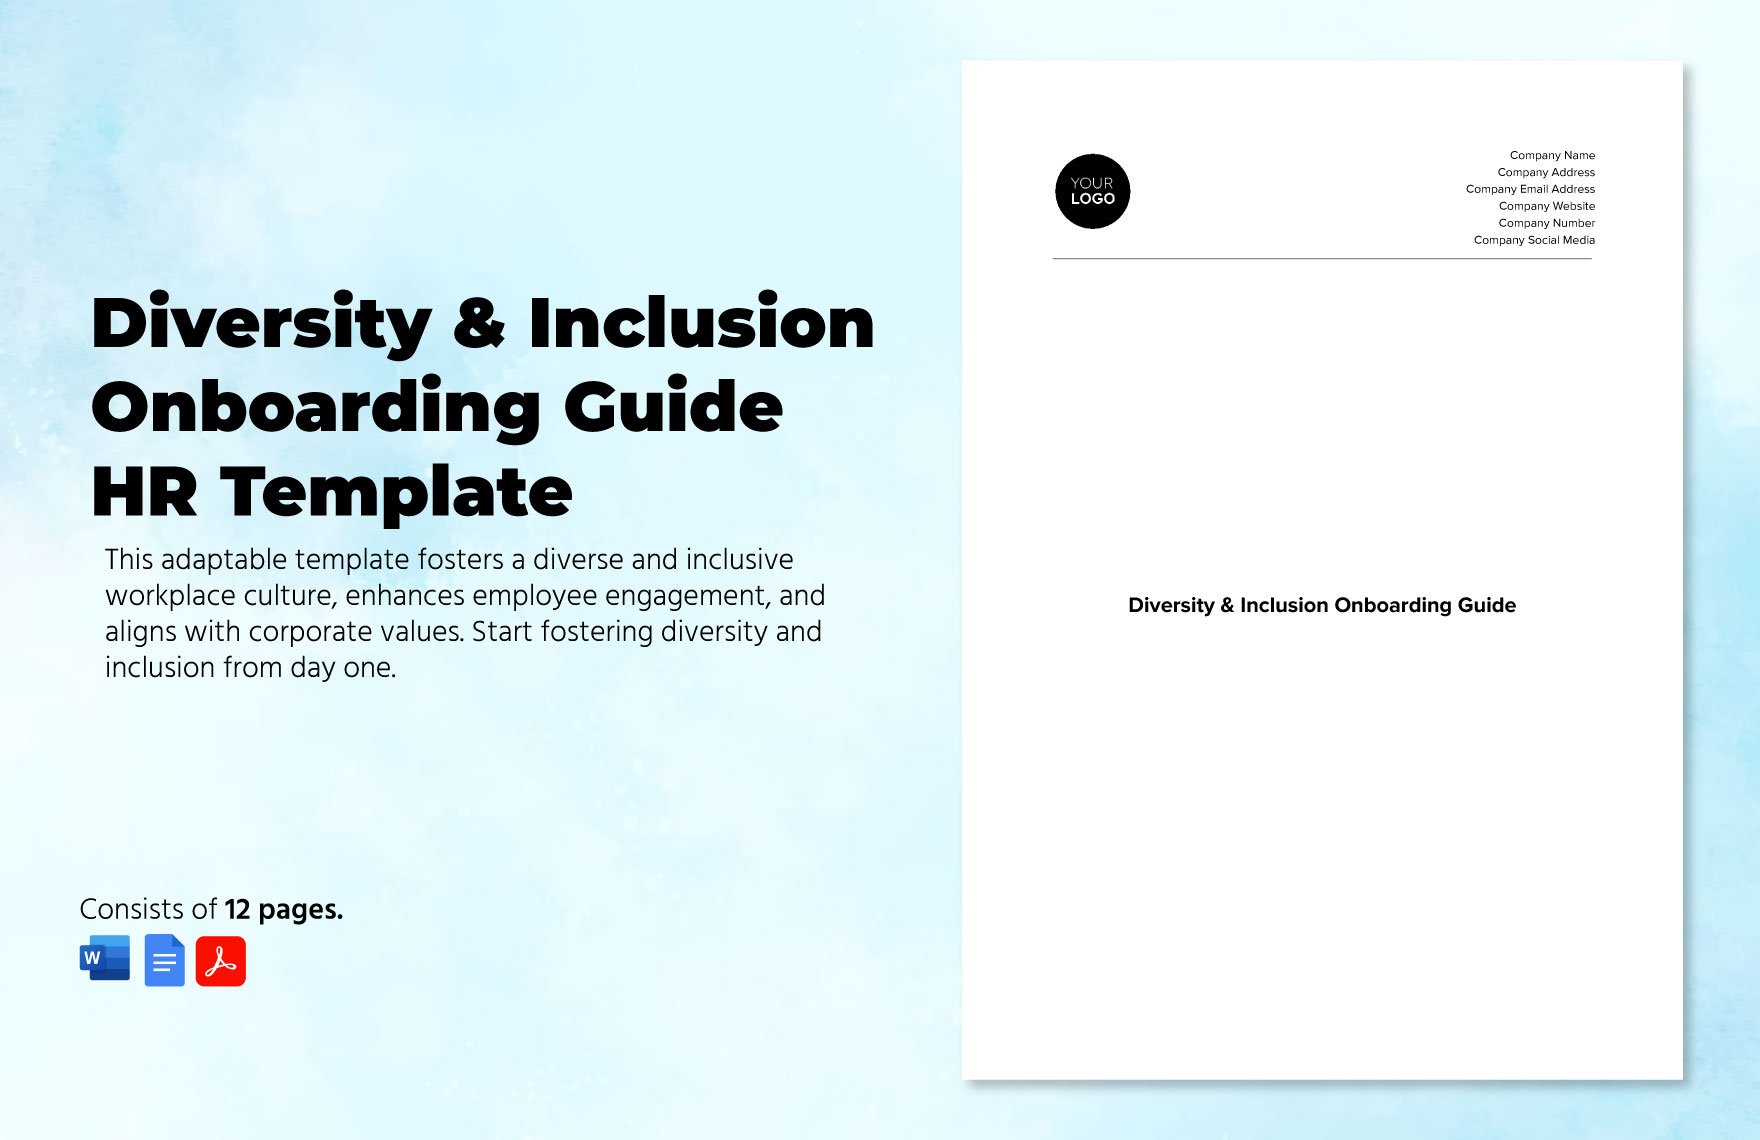 Diversity & Inclusion Onboarding Guide HR Template in Word, Google Docs, PDF